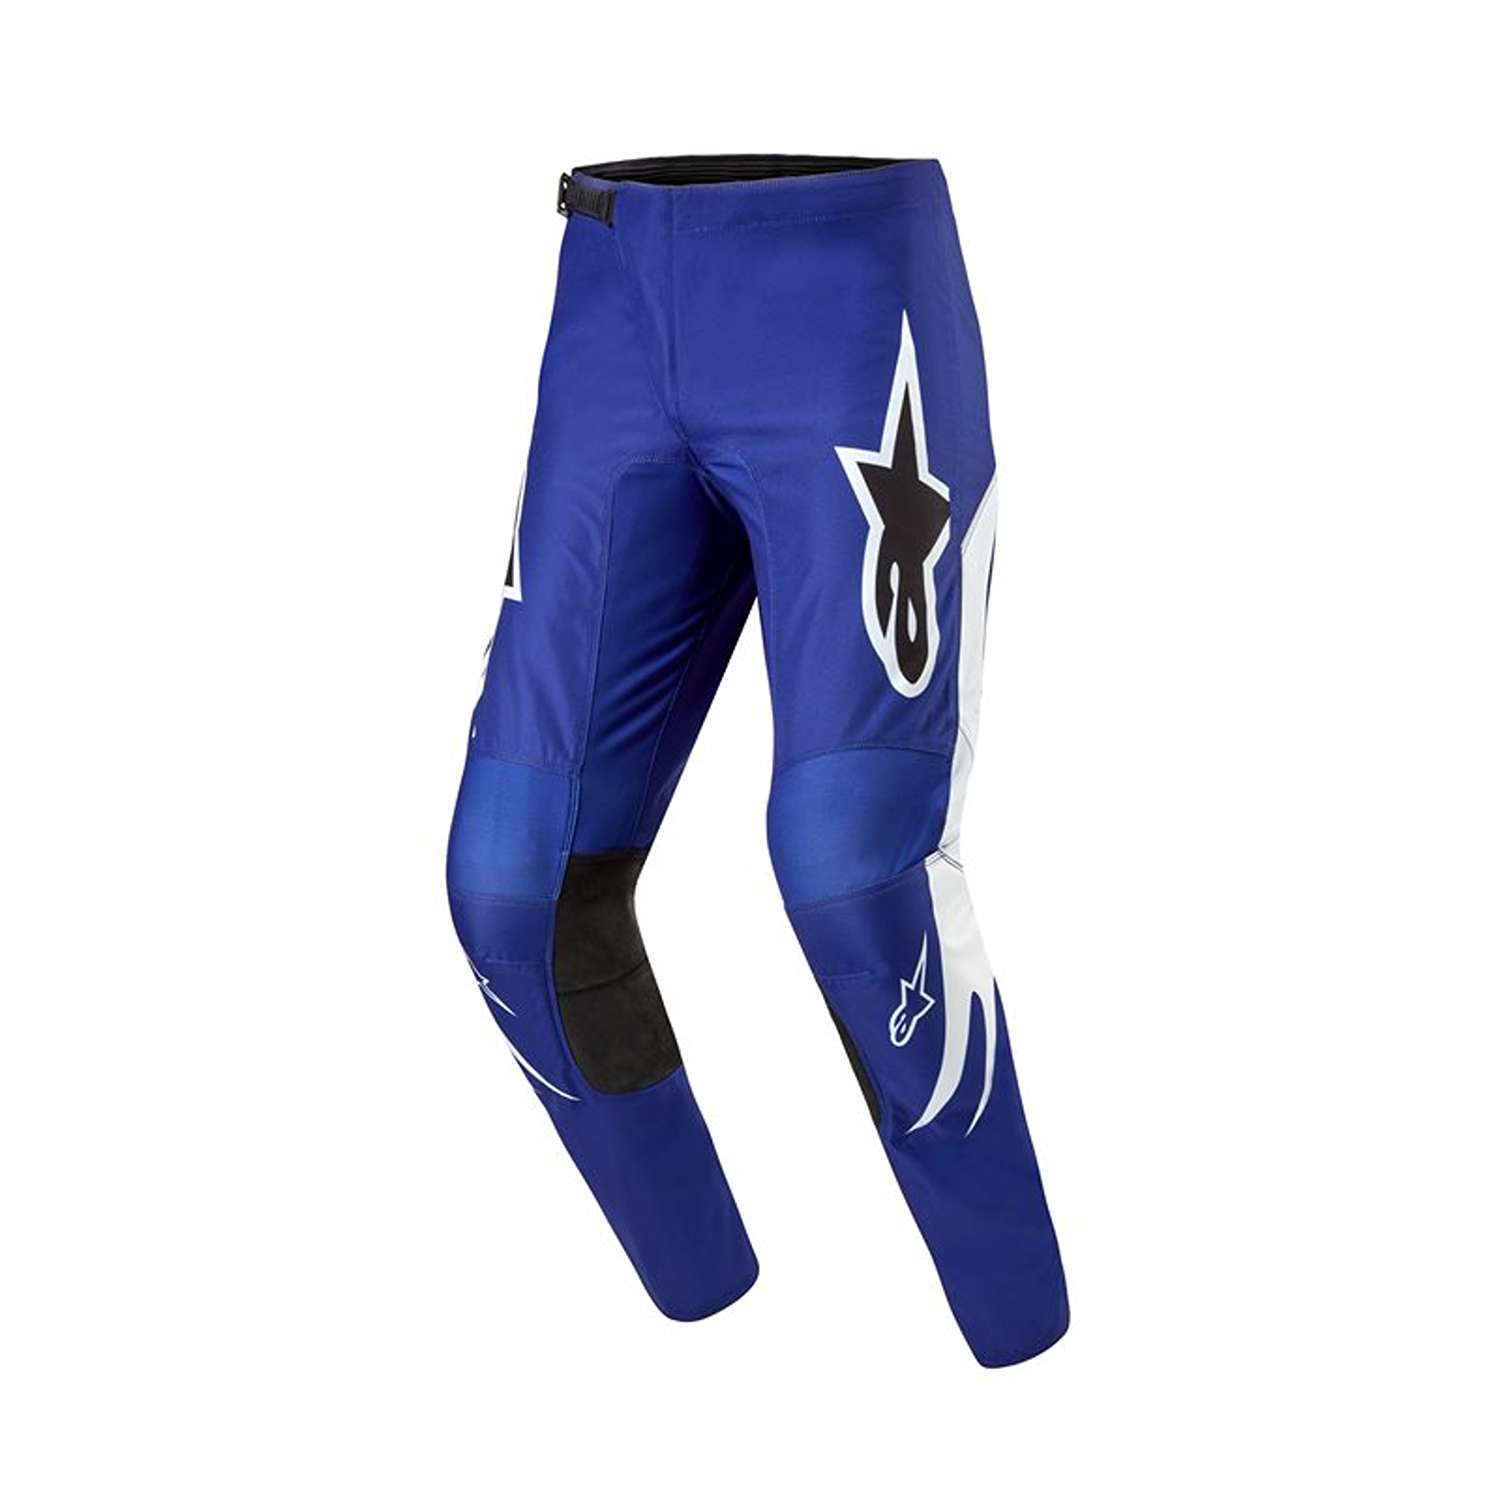 Image of Alpinestars Fluid Lucent Pants Blue Ray White Size 40 ID 8059347266190